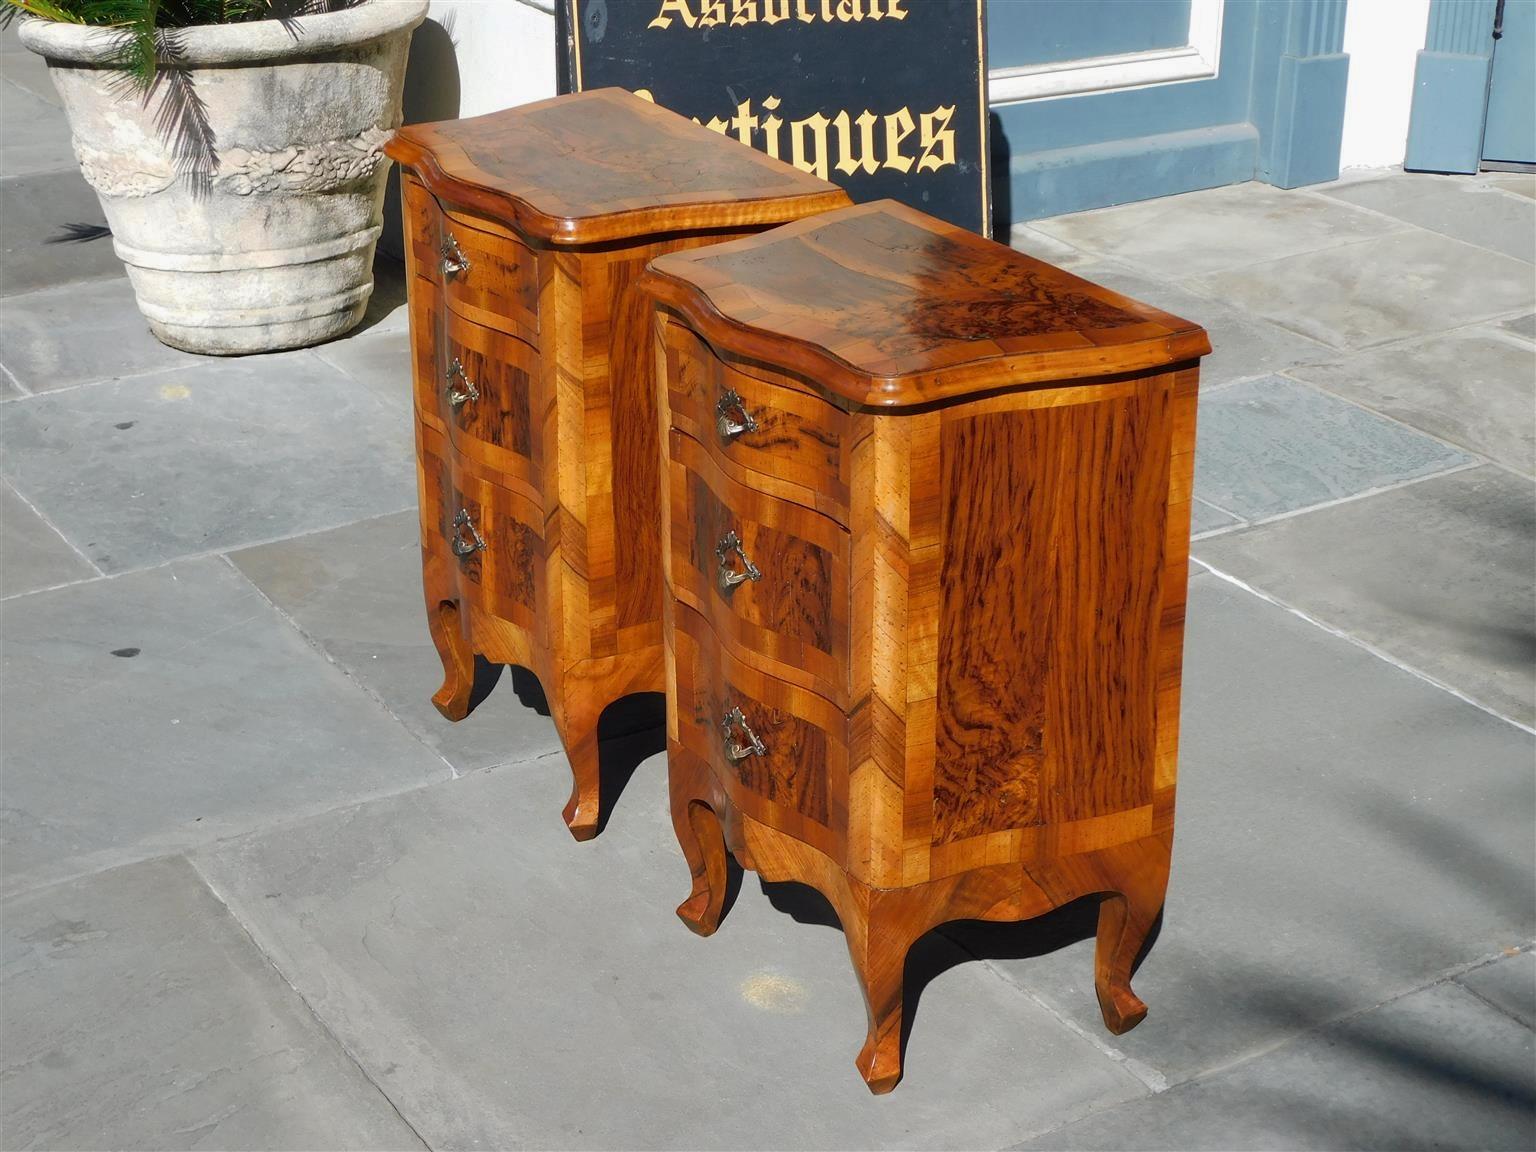 Hand-Carved Pair of Italian Burl Walnut Serpentine Inlaid Commodes on Cabriole Legs, C. 1840